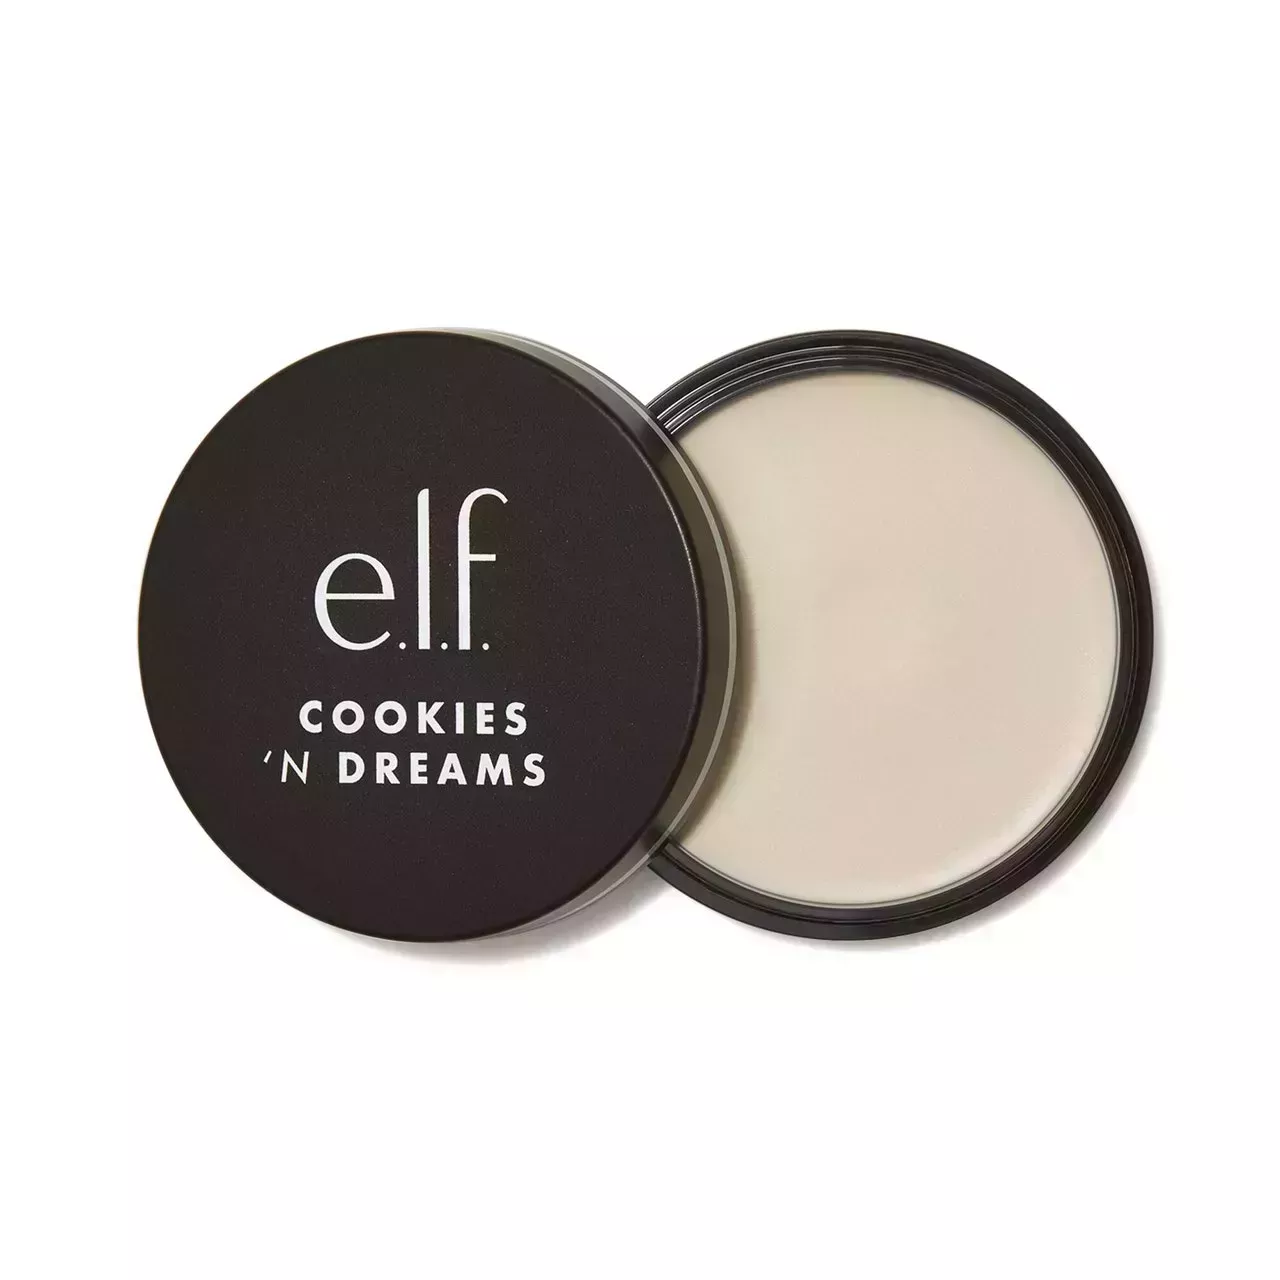 E.l.f. Cookies 'N Dreams Just the Putty Primer on white background